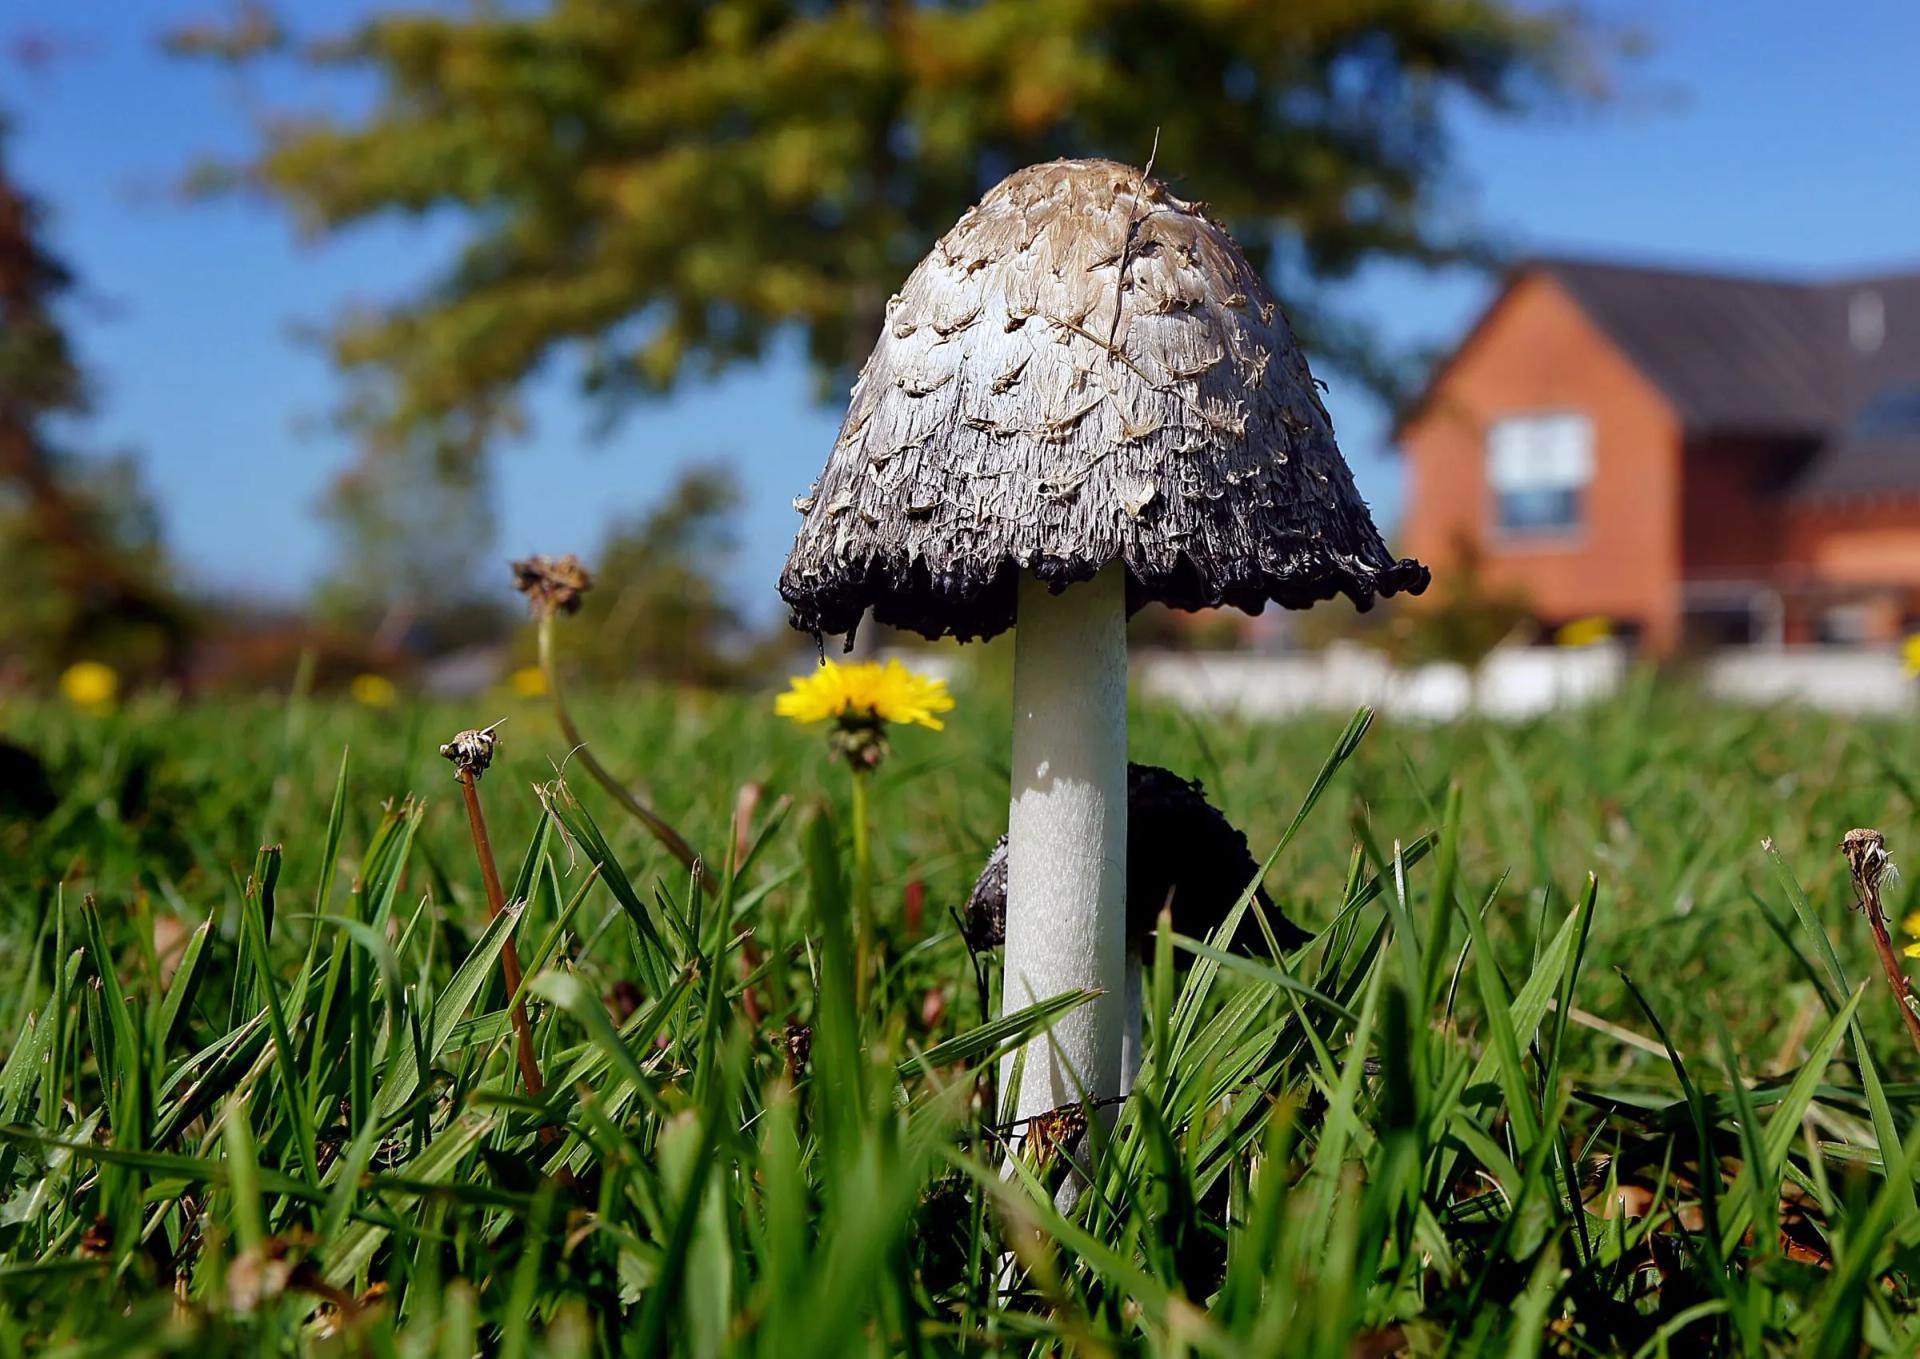 A Rogue Mushroom in the Lawn